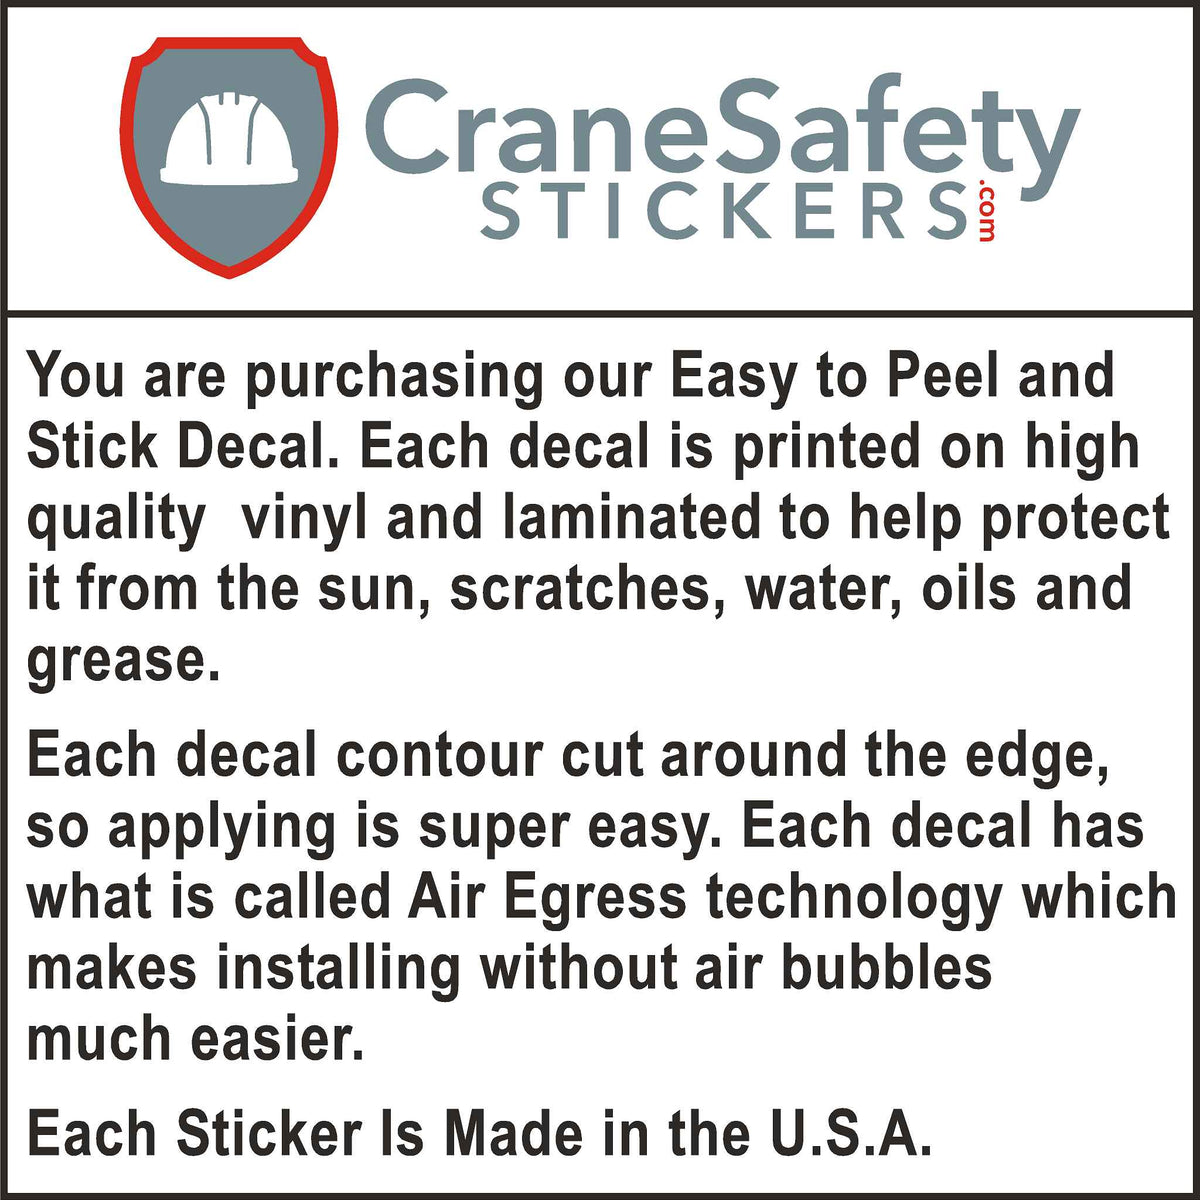 The Quality of our Electrocution Hazard Crane Decal Printed with; Unlawful To Operate Equipment Within 10 Feet Of High Voltage Lines of 50,000 Volts or Less.